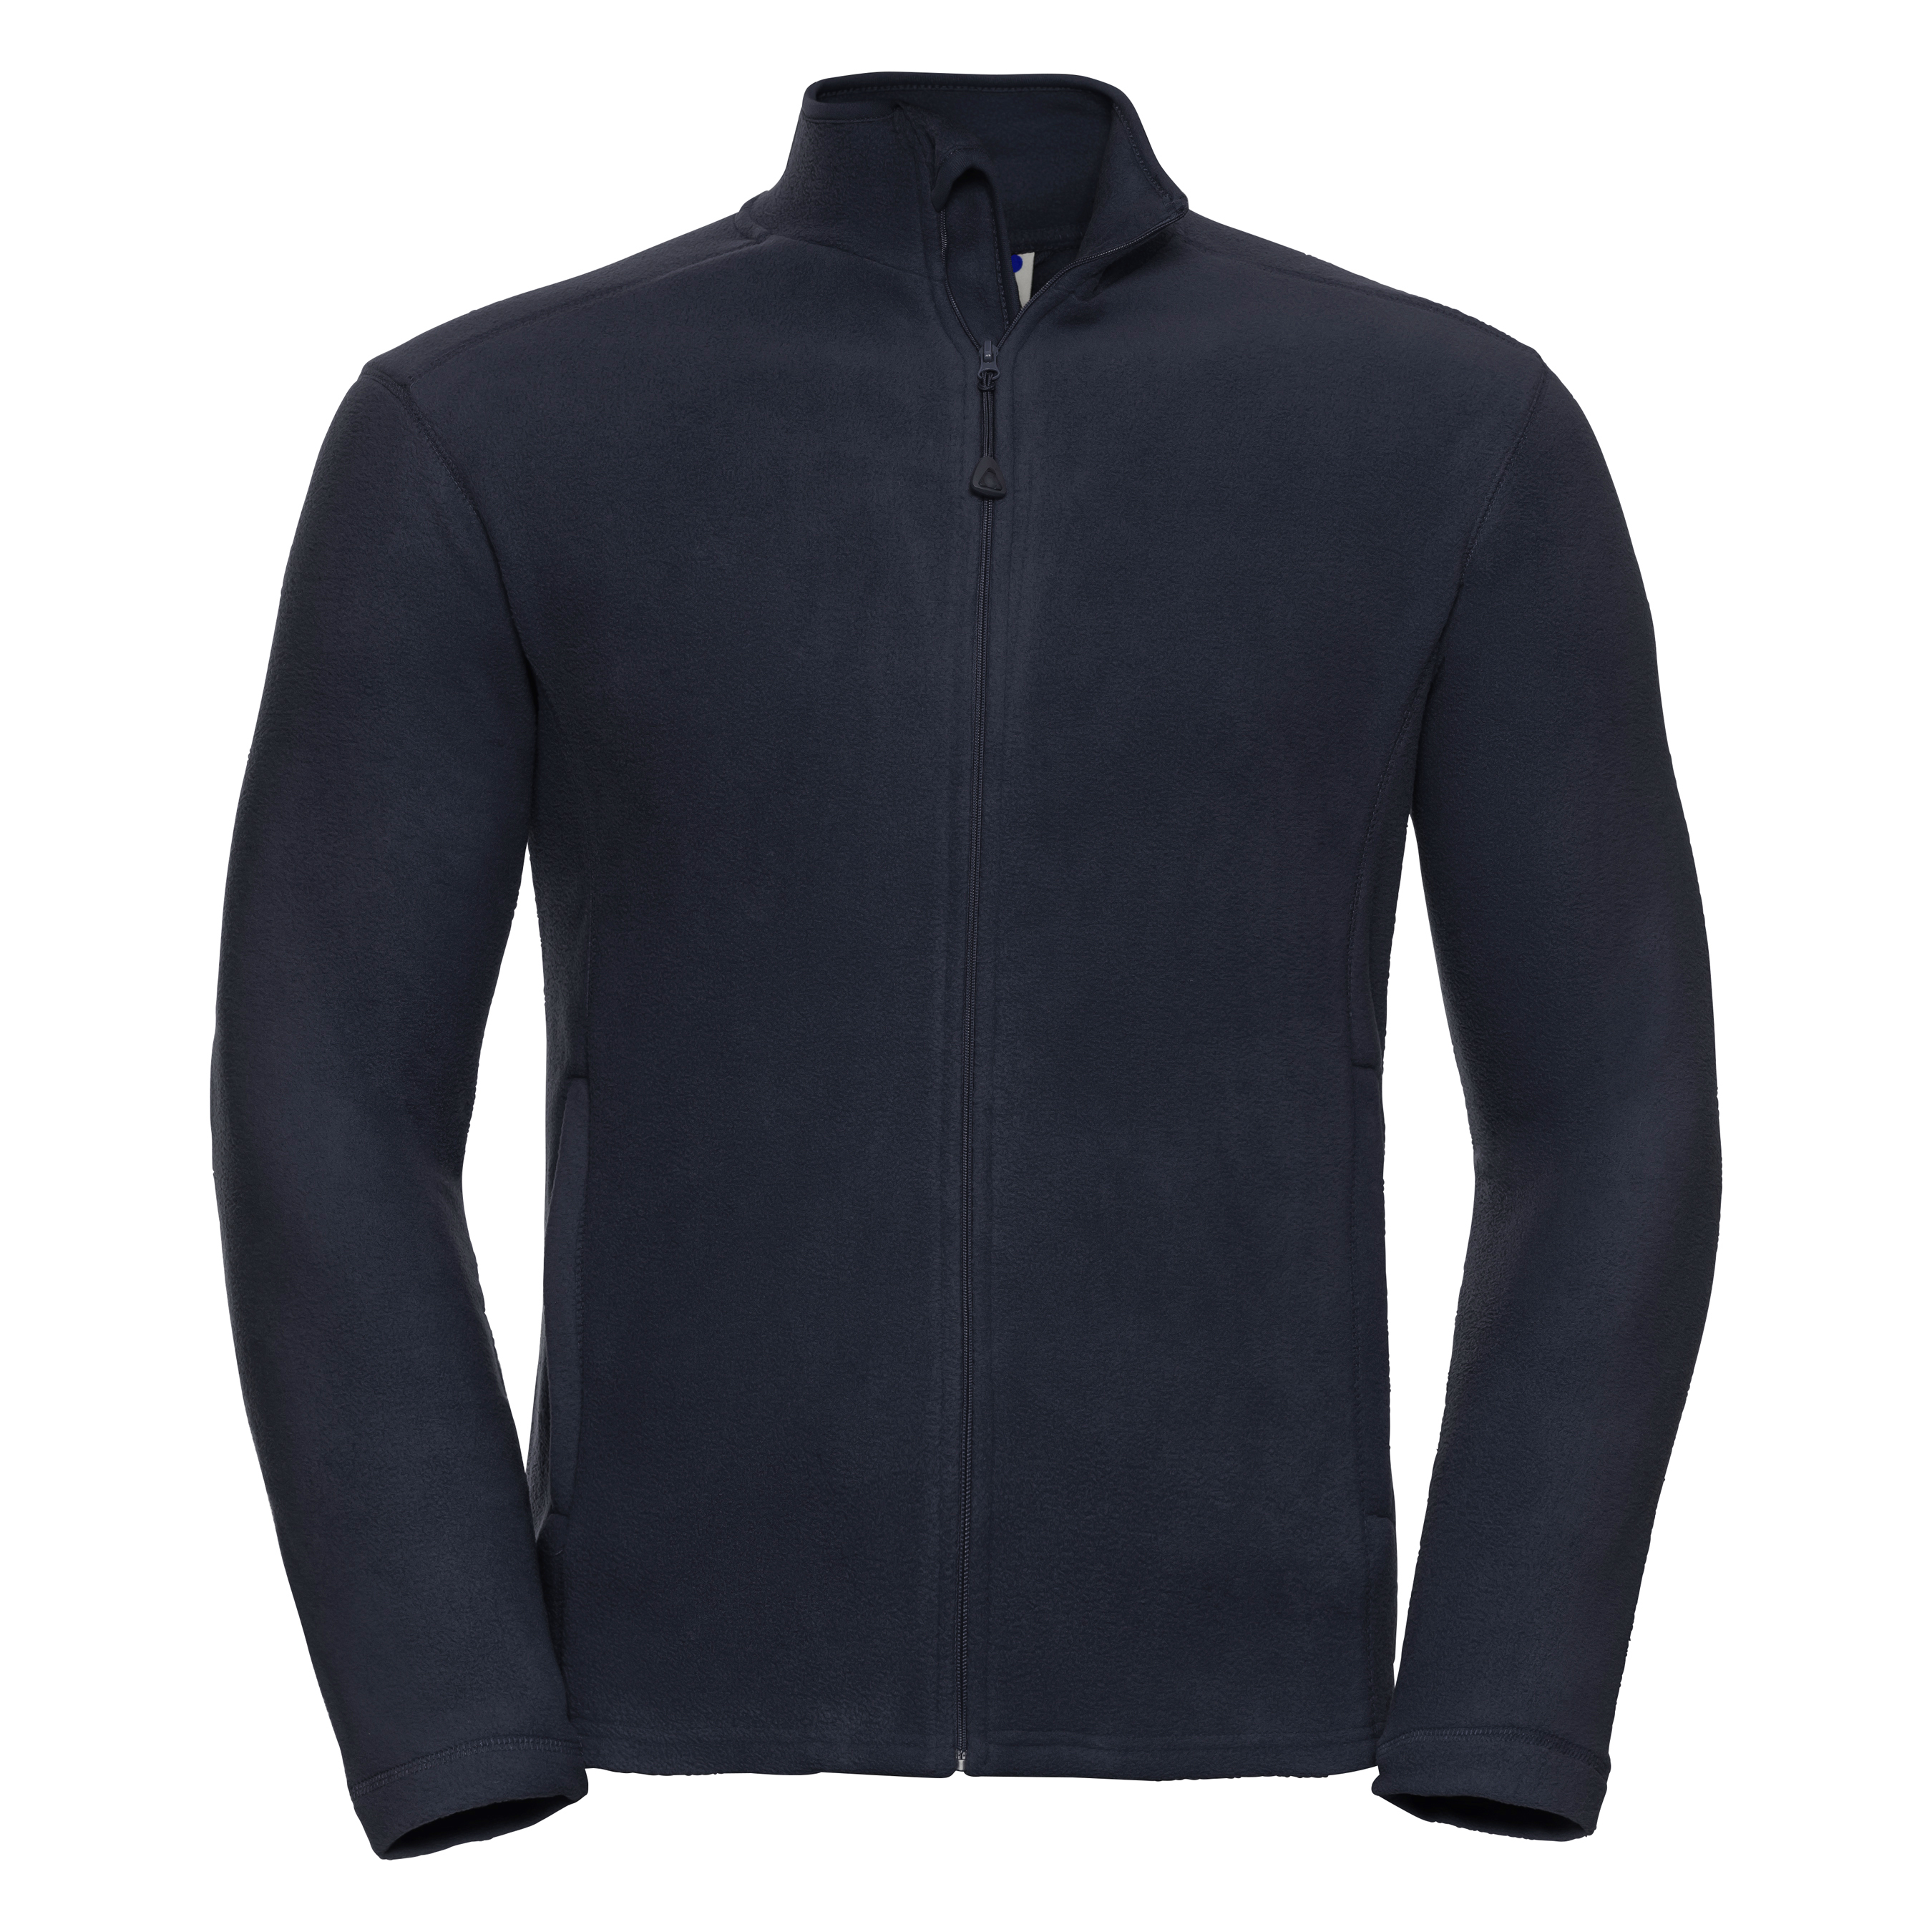 ax-httpswebsystems.s3.amazonaws.comtmp_for_downloadrussell-full-zip-microfleece-french-navy.jpeg